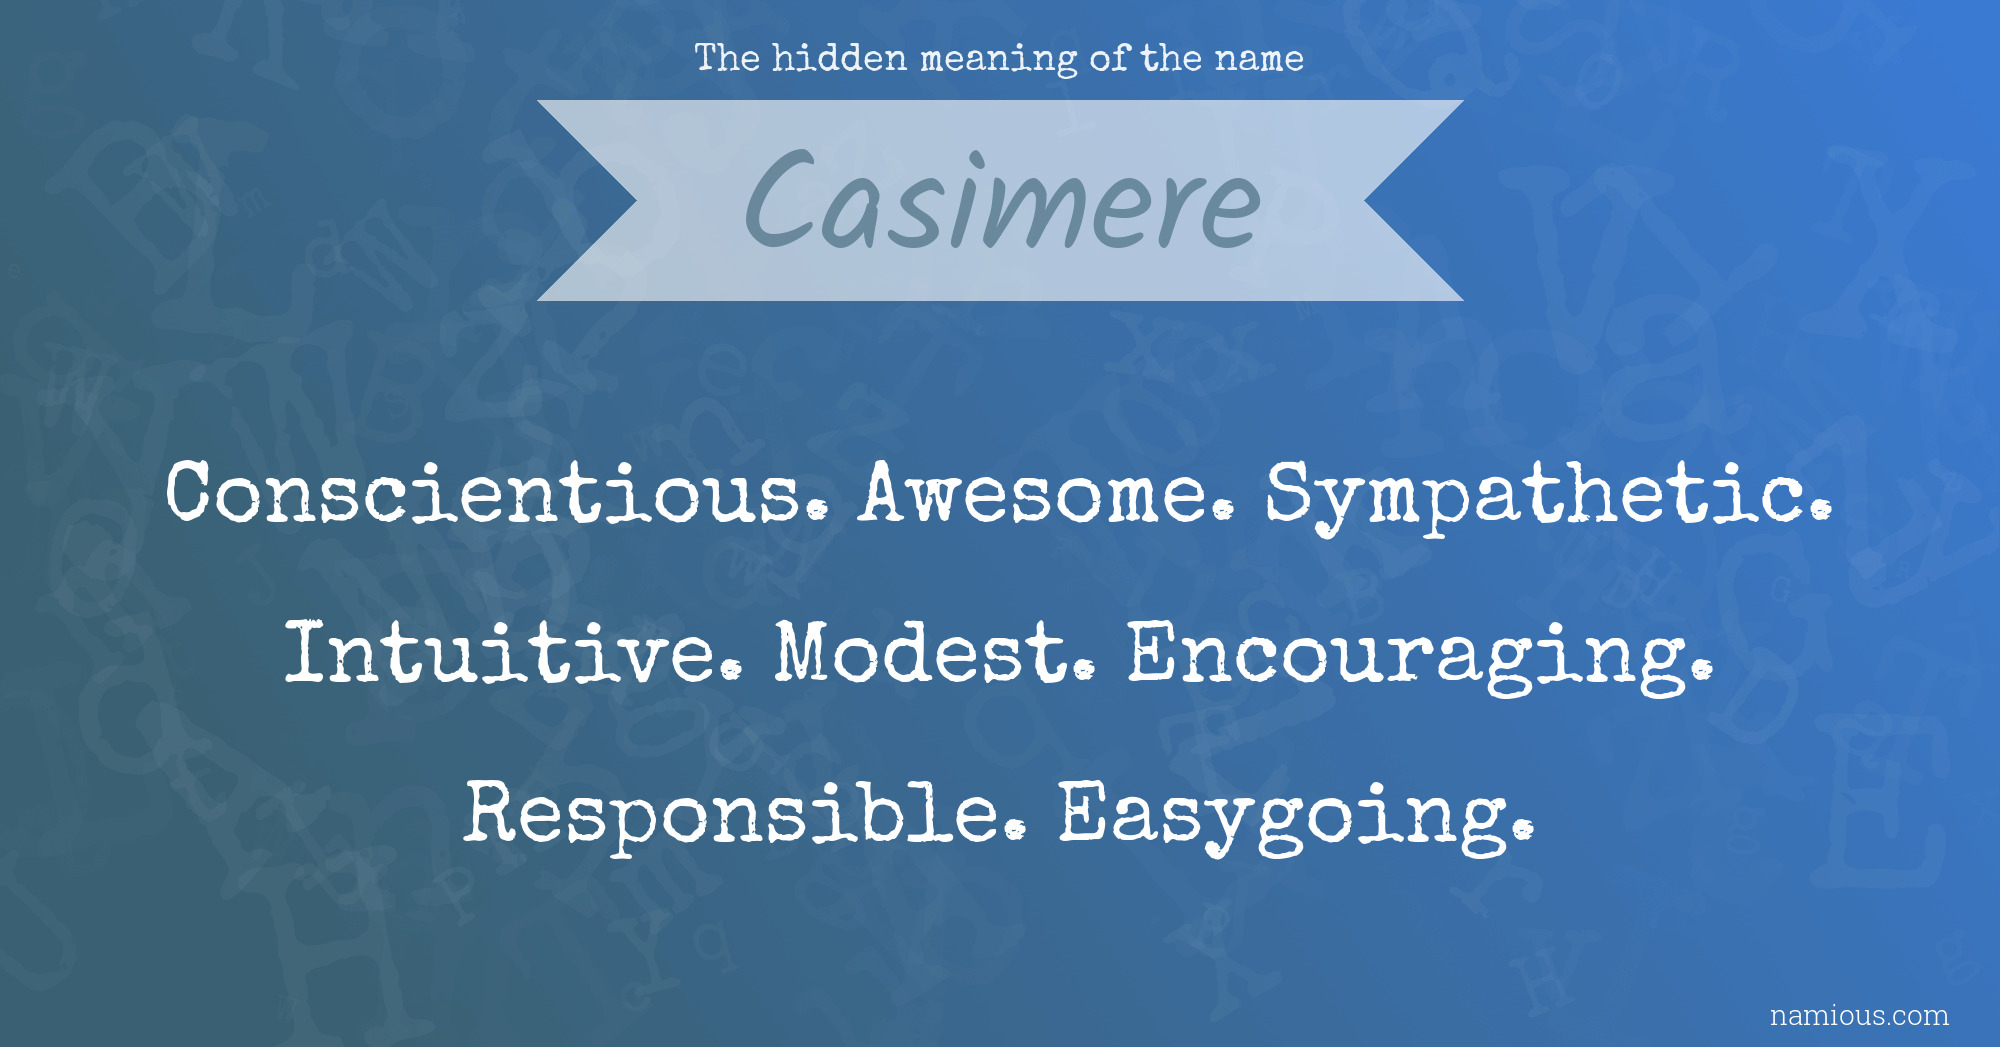 The hidden meaning of the name Casimere